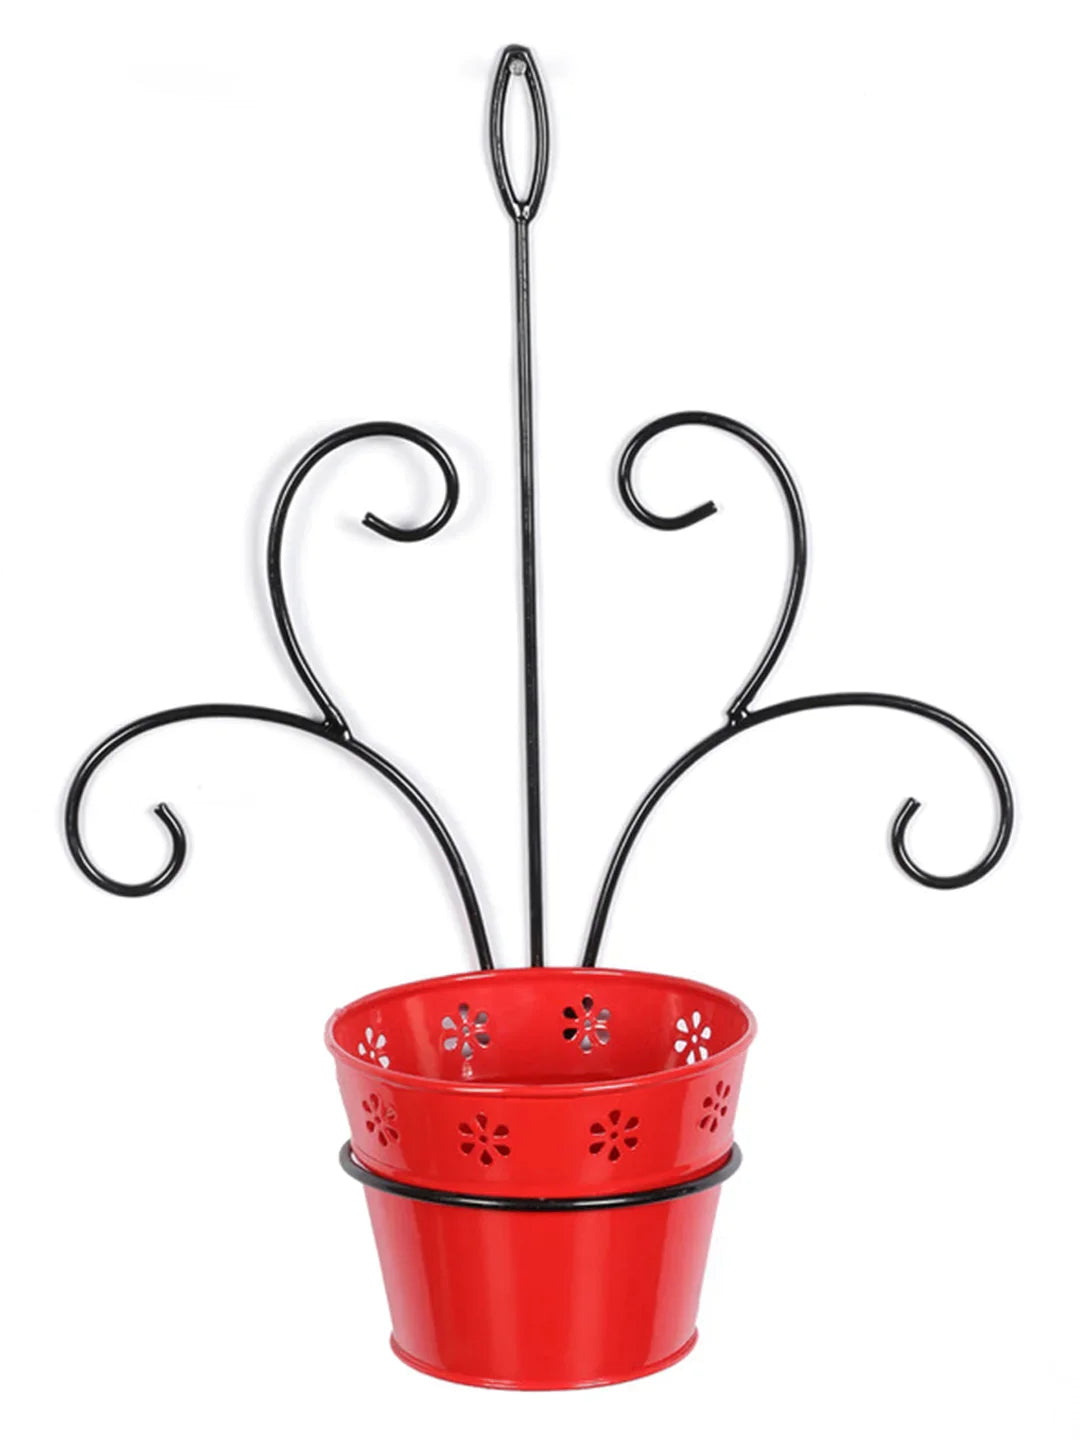 Wall Mounted Red Planter